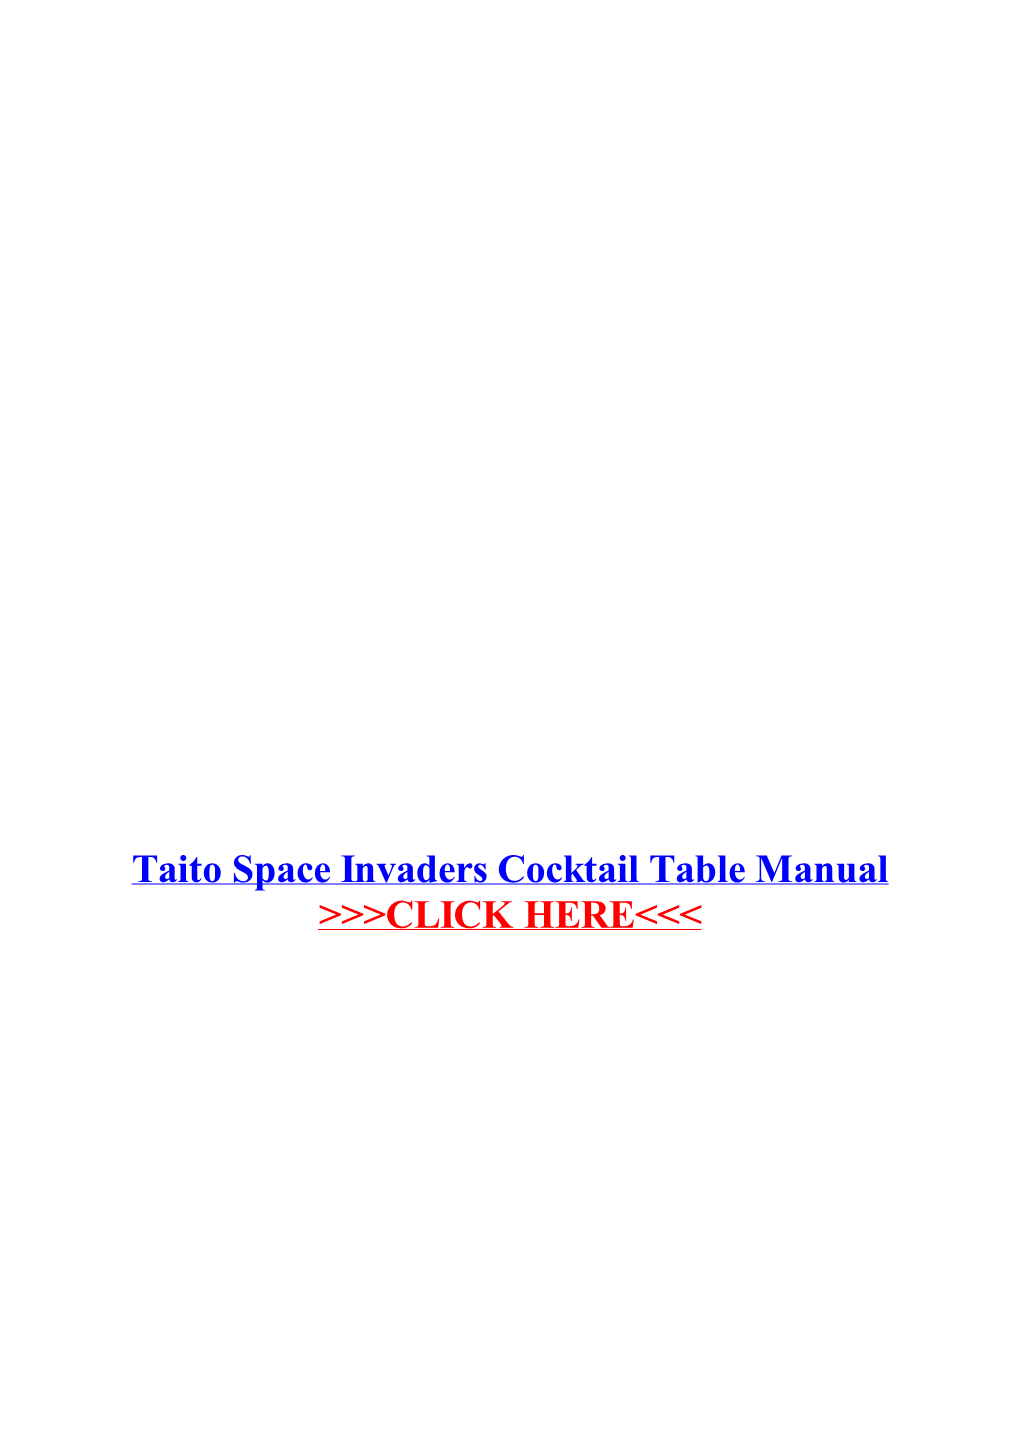 Taito Space Invaders Cocktail Table Manual